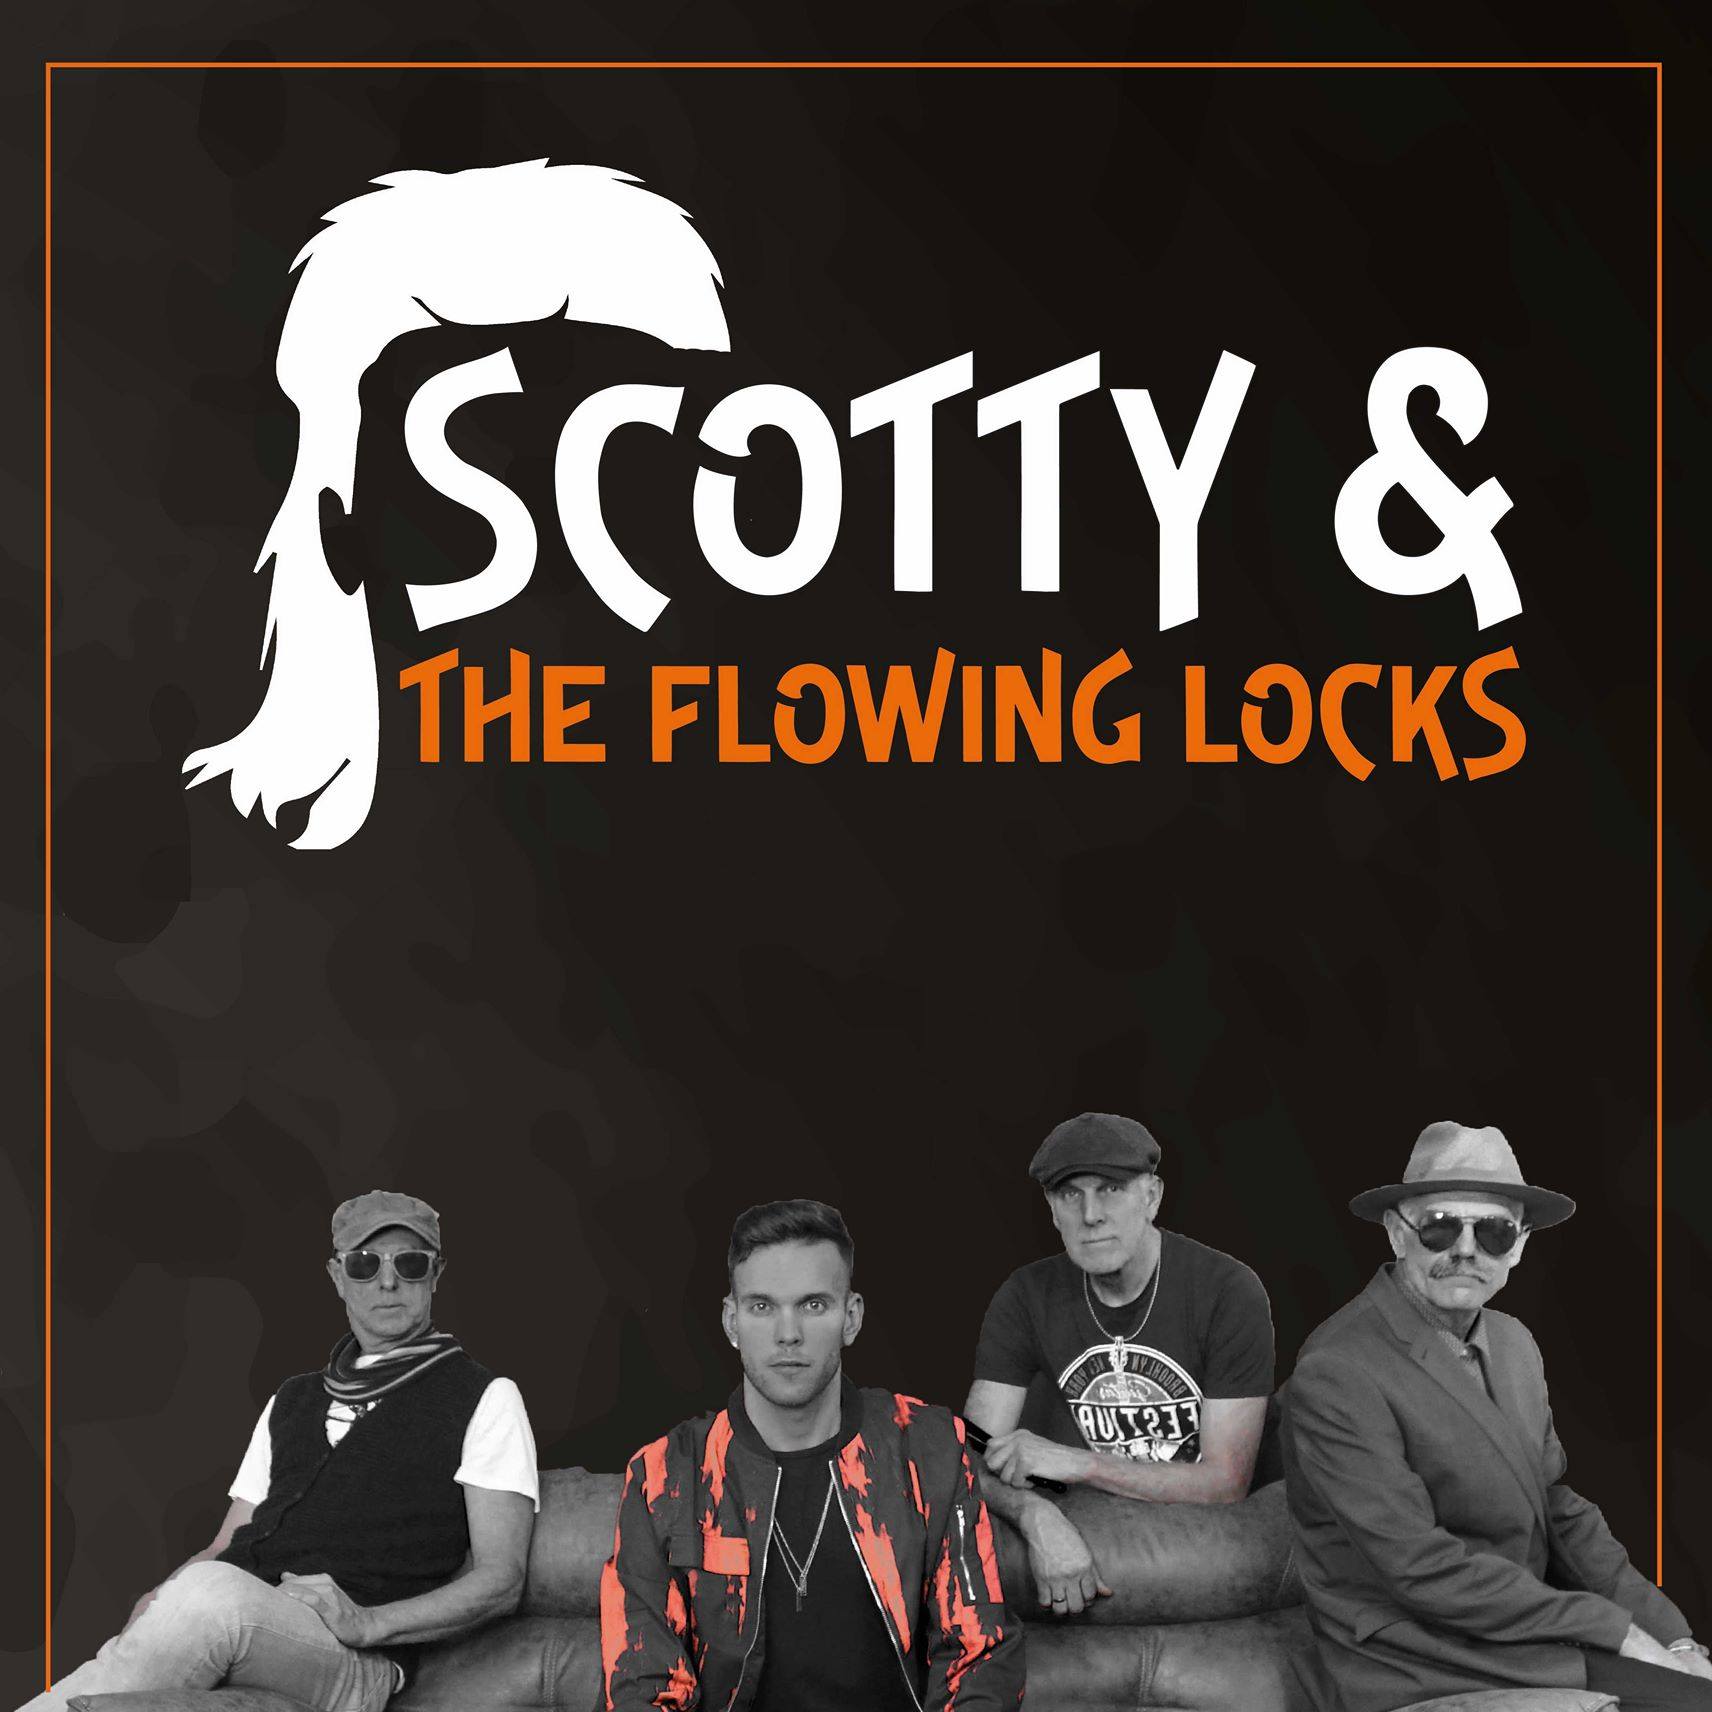 Scotty and The Flowing Locks